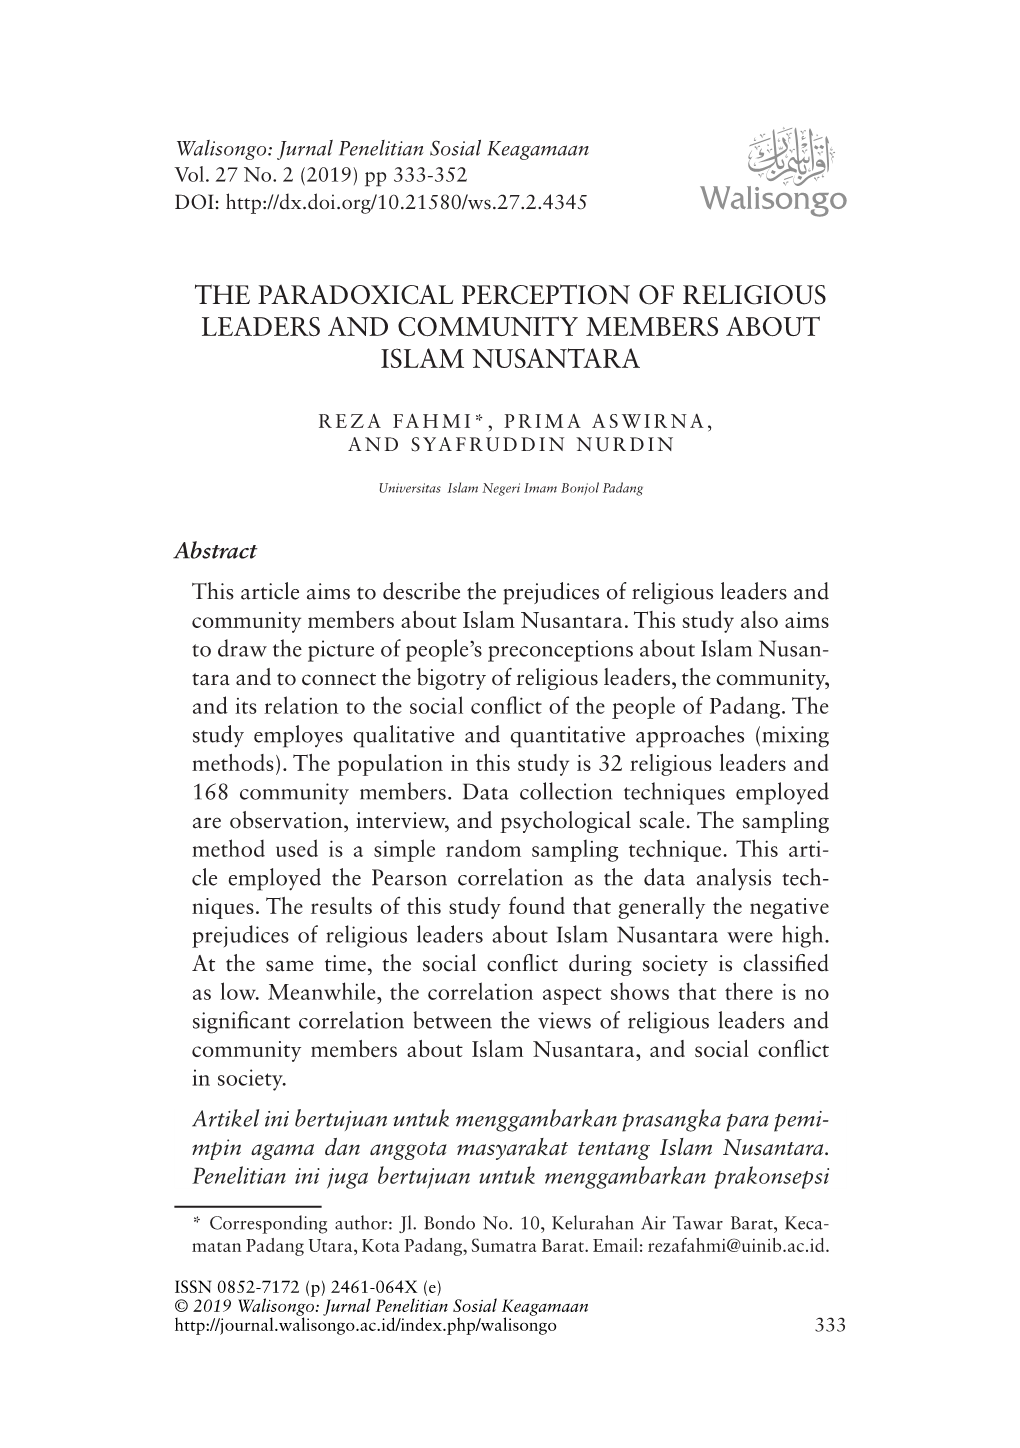 The Paradoxical Perception of Religious Leaders and Community Members About Islam Nusantara